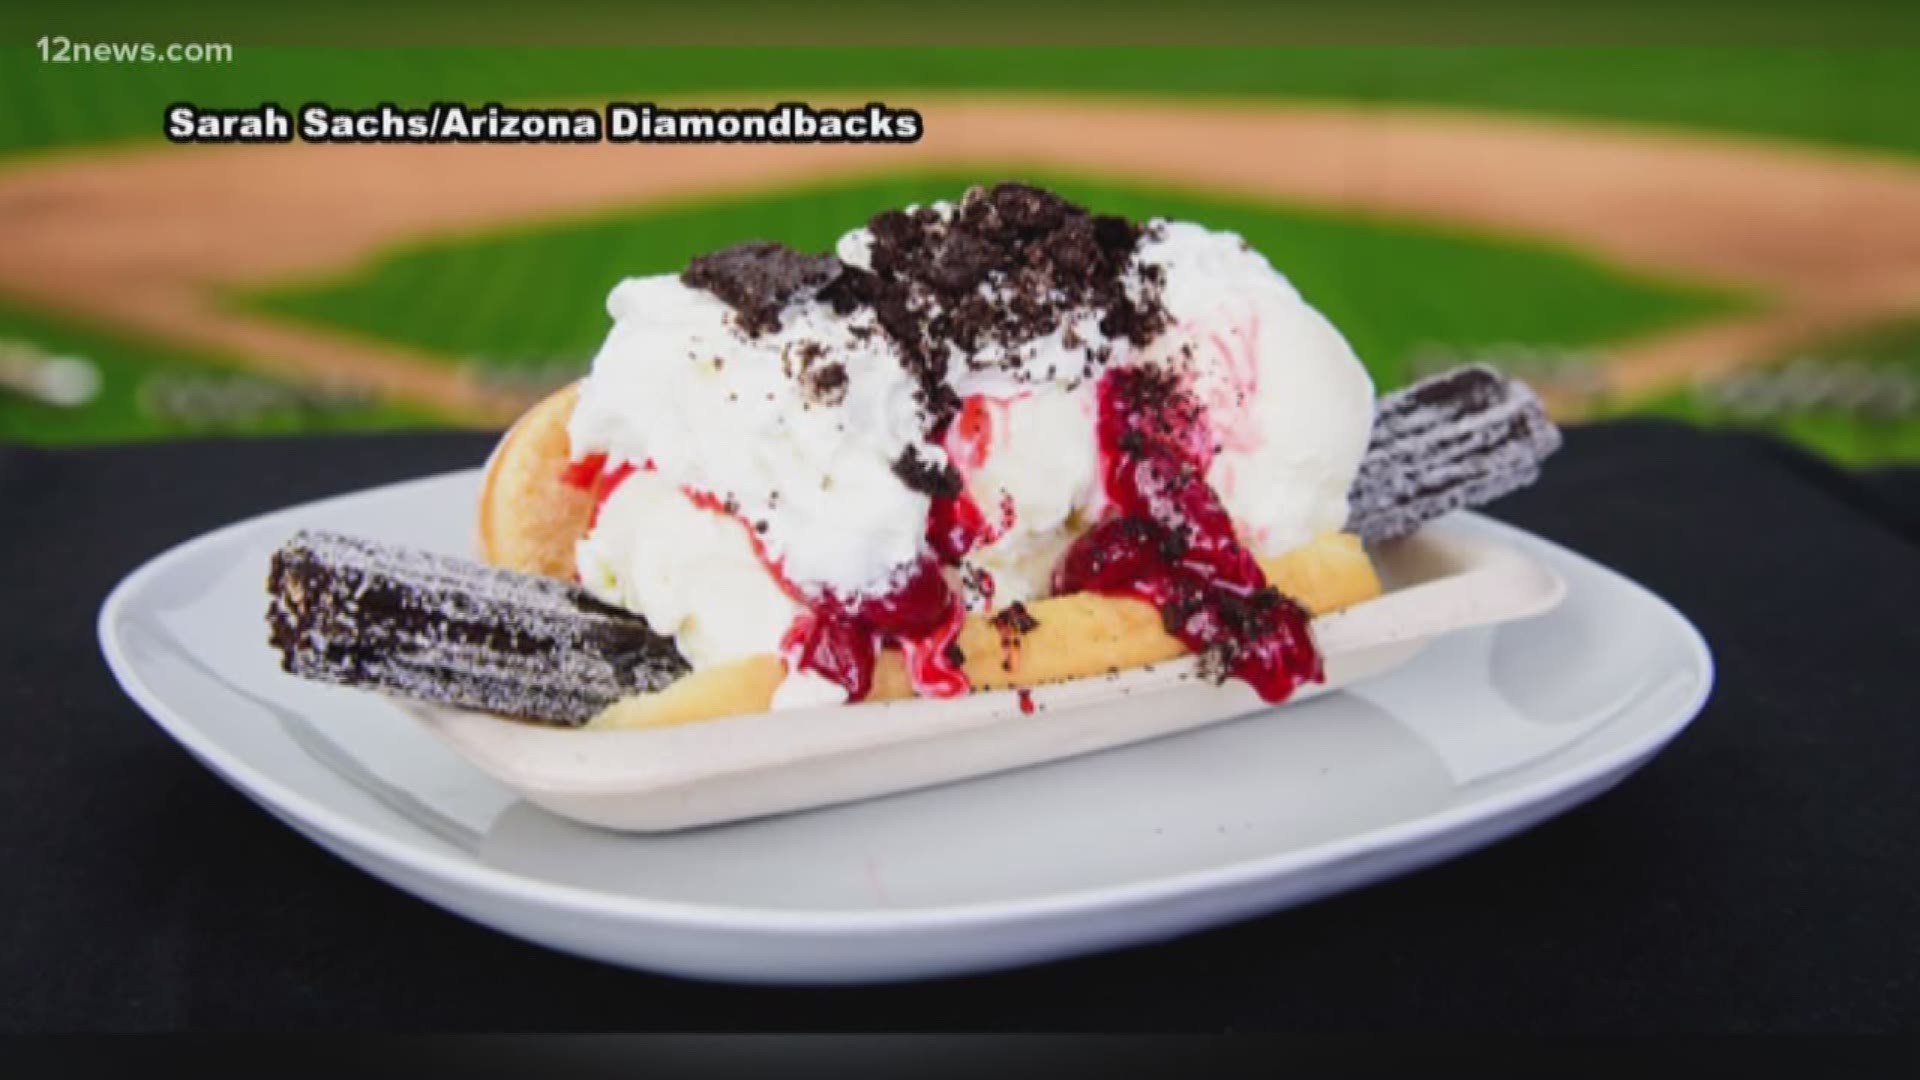 The Arizona Diamondbacks showed off the churro dog at the MLB Food Fest in New York. Each team brought a unique delicacy.